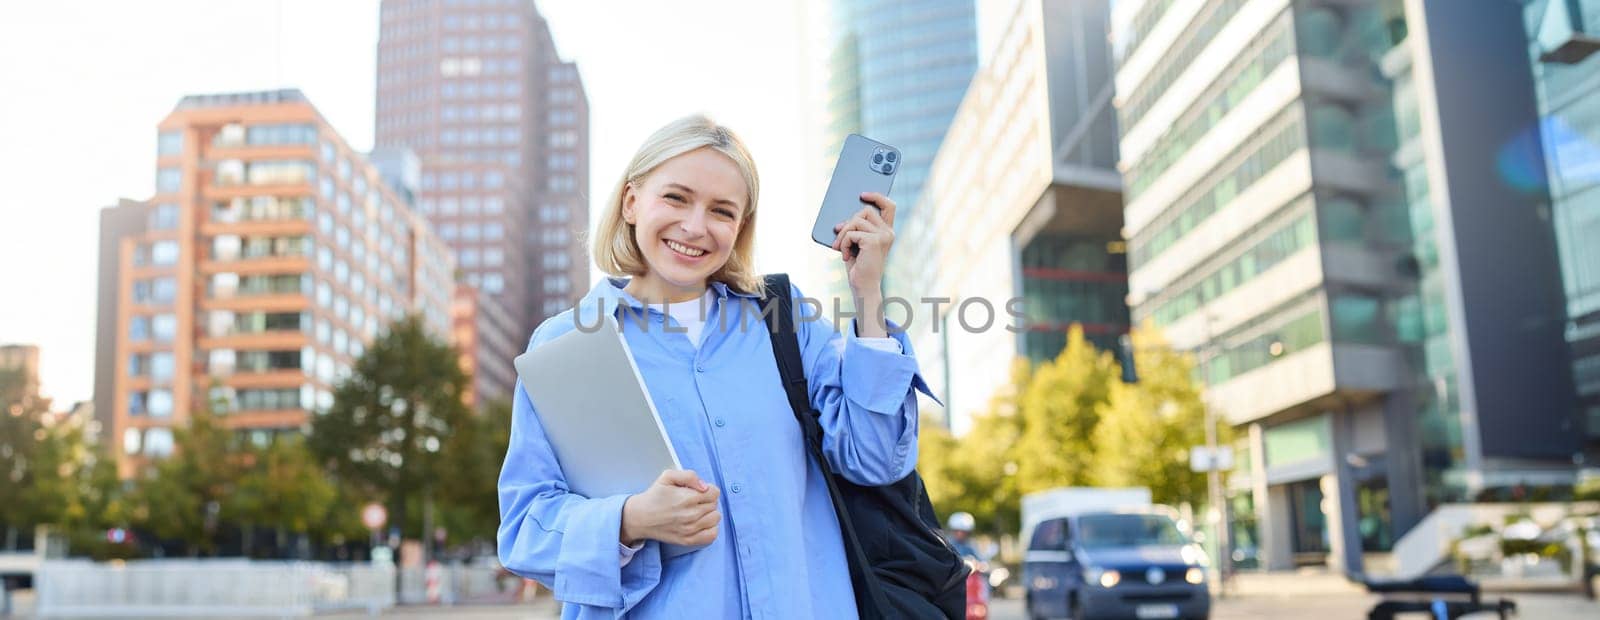 Image of young stylish, modern blond woman in blue shirt, holding laptop and backpack, using smartphone, smiling, walking along the street, posing in city centre.